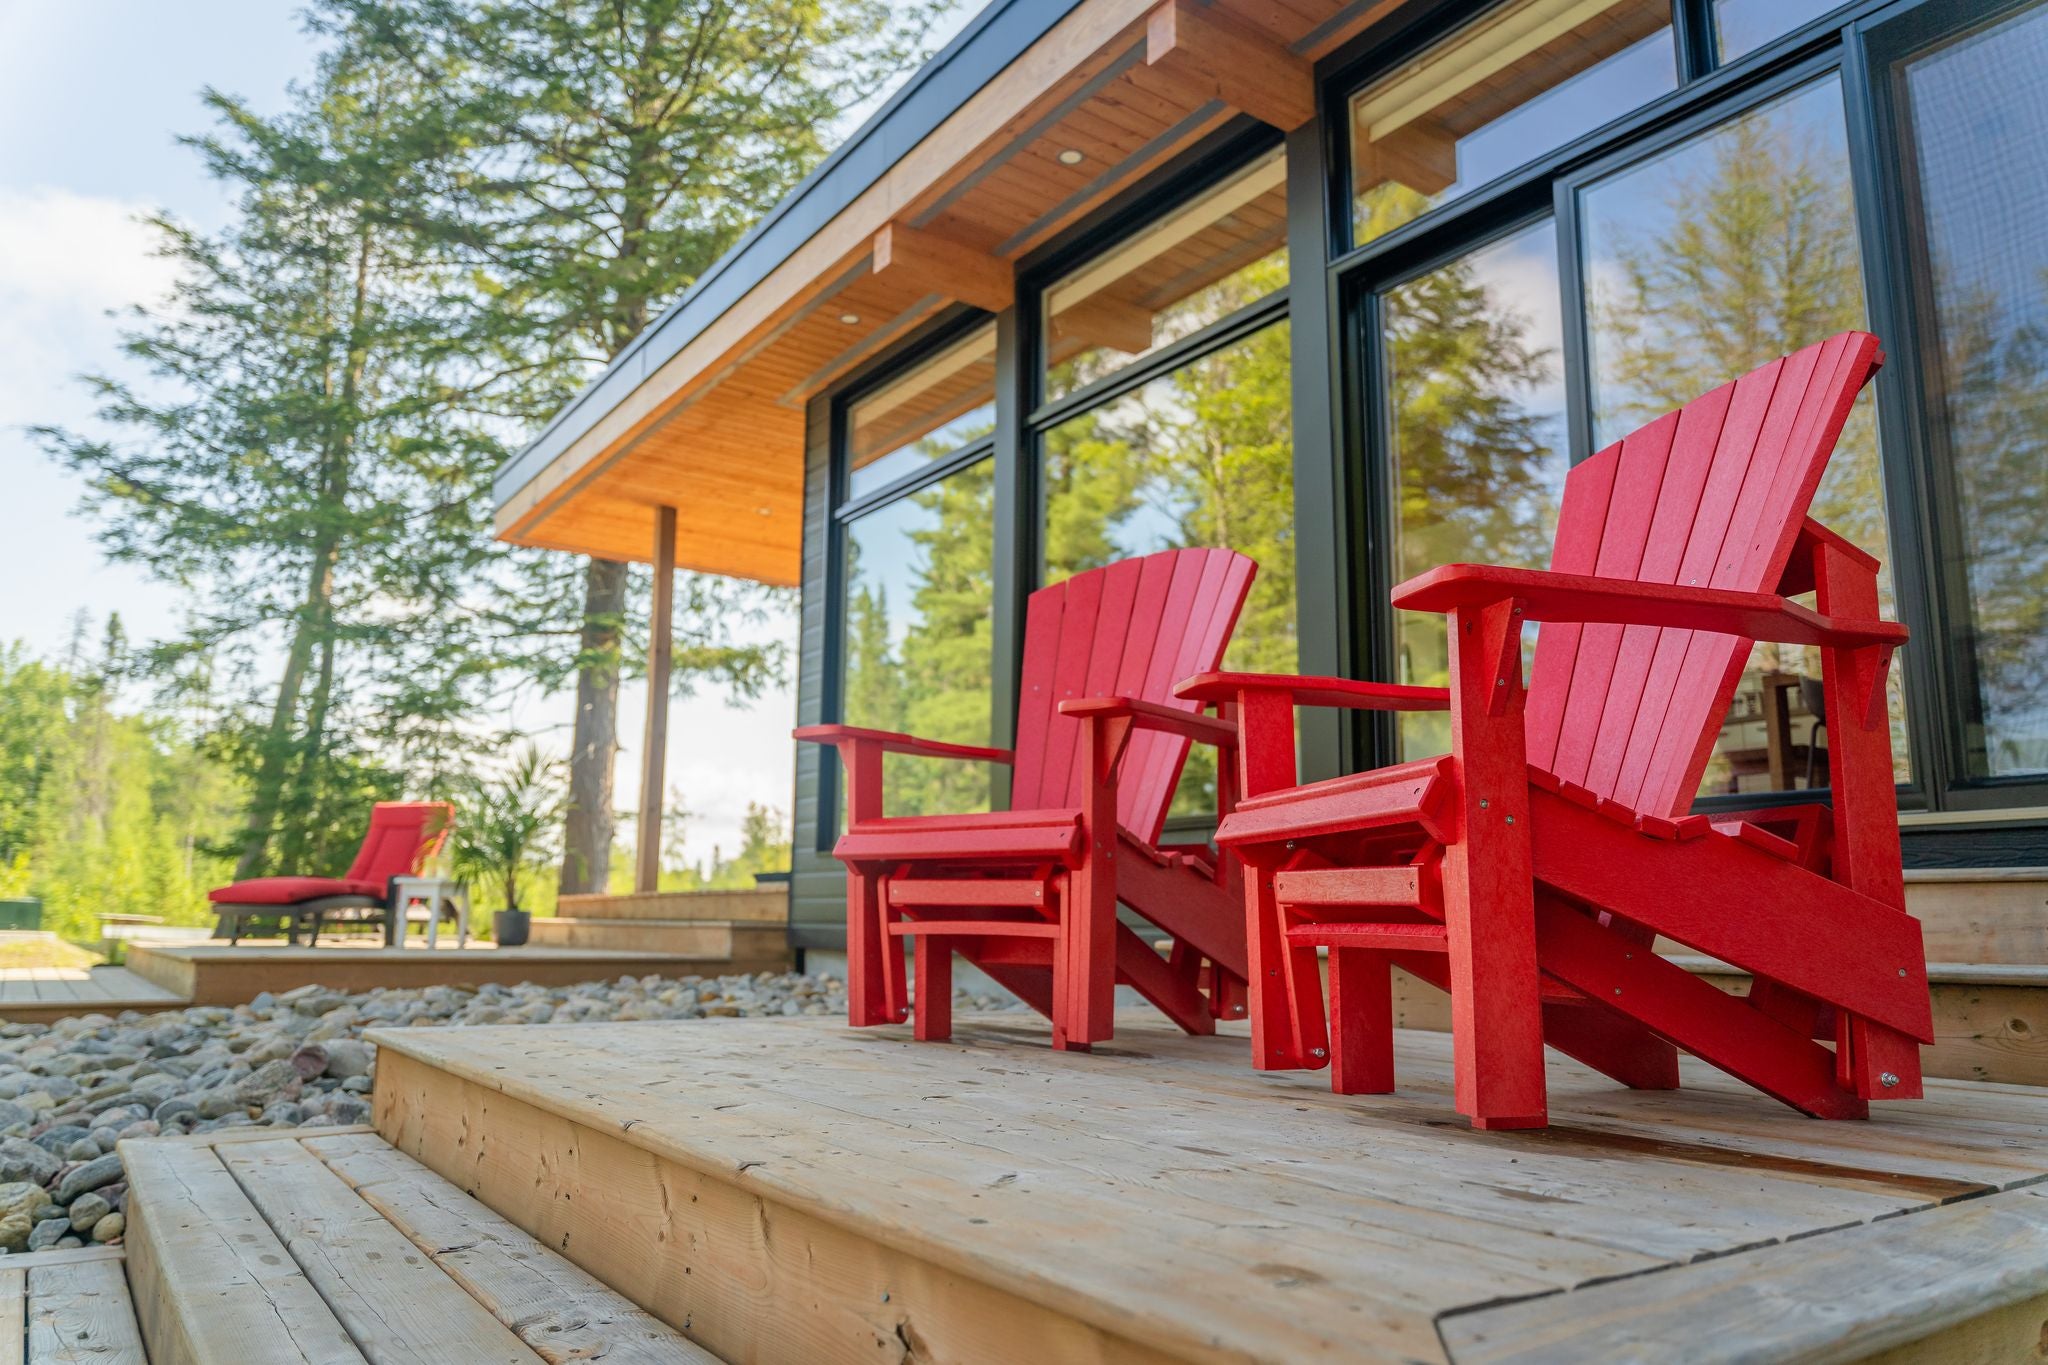 An image of two red patio chairs.